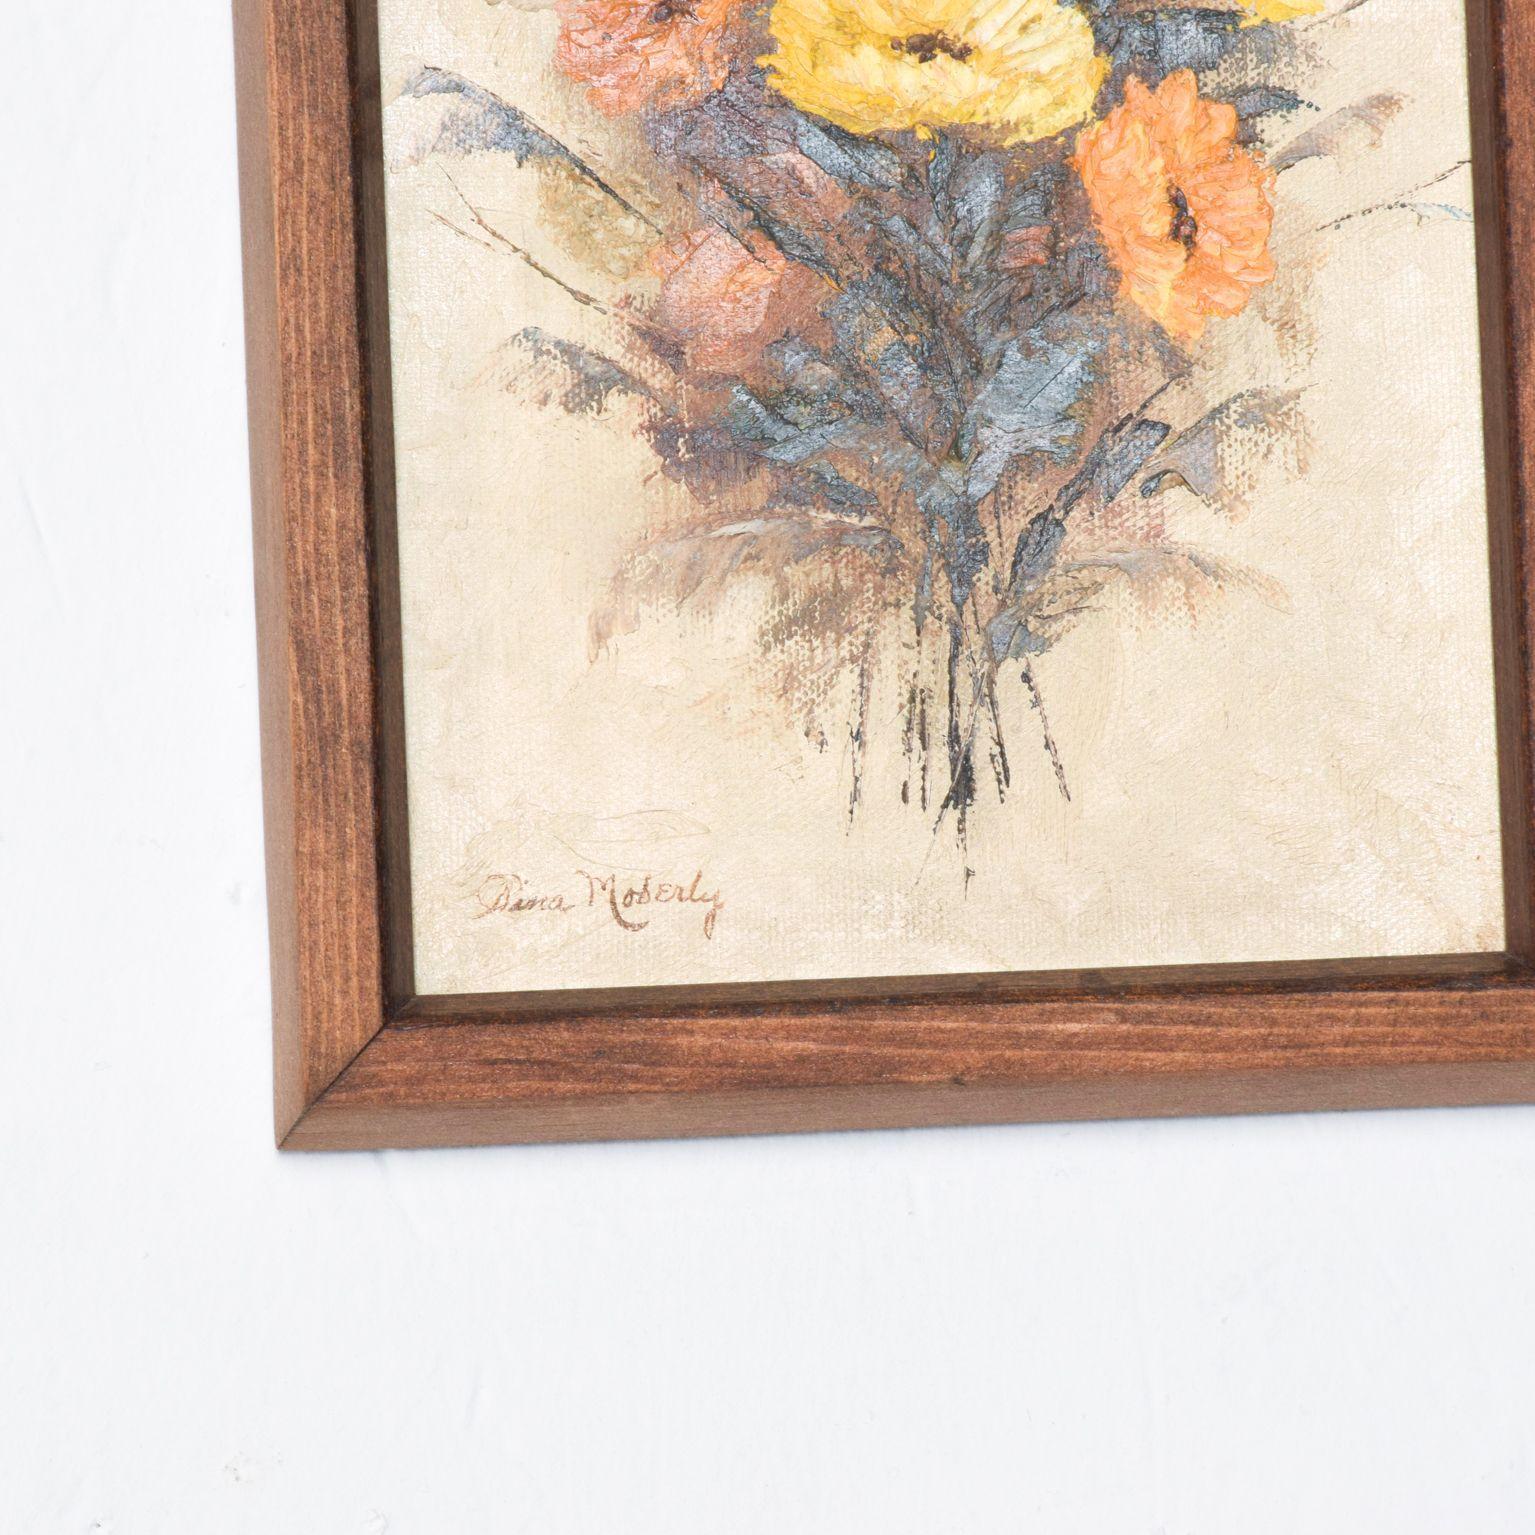 Wood 1960s Two Piece Painting Wall Art Yellow Orange Floral Bouquet by Pina Moberly